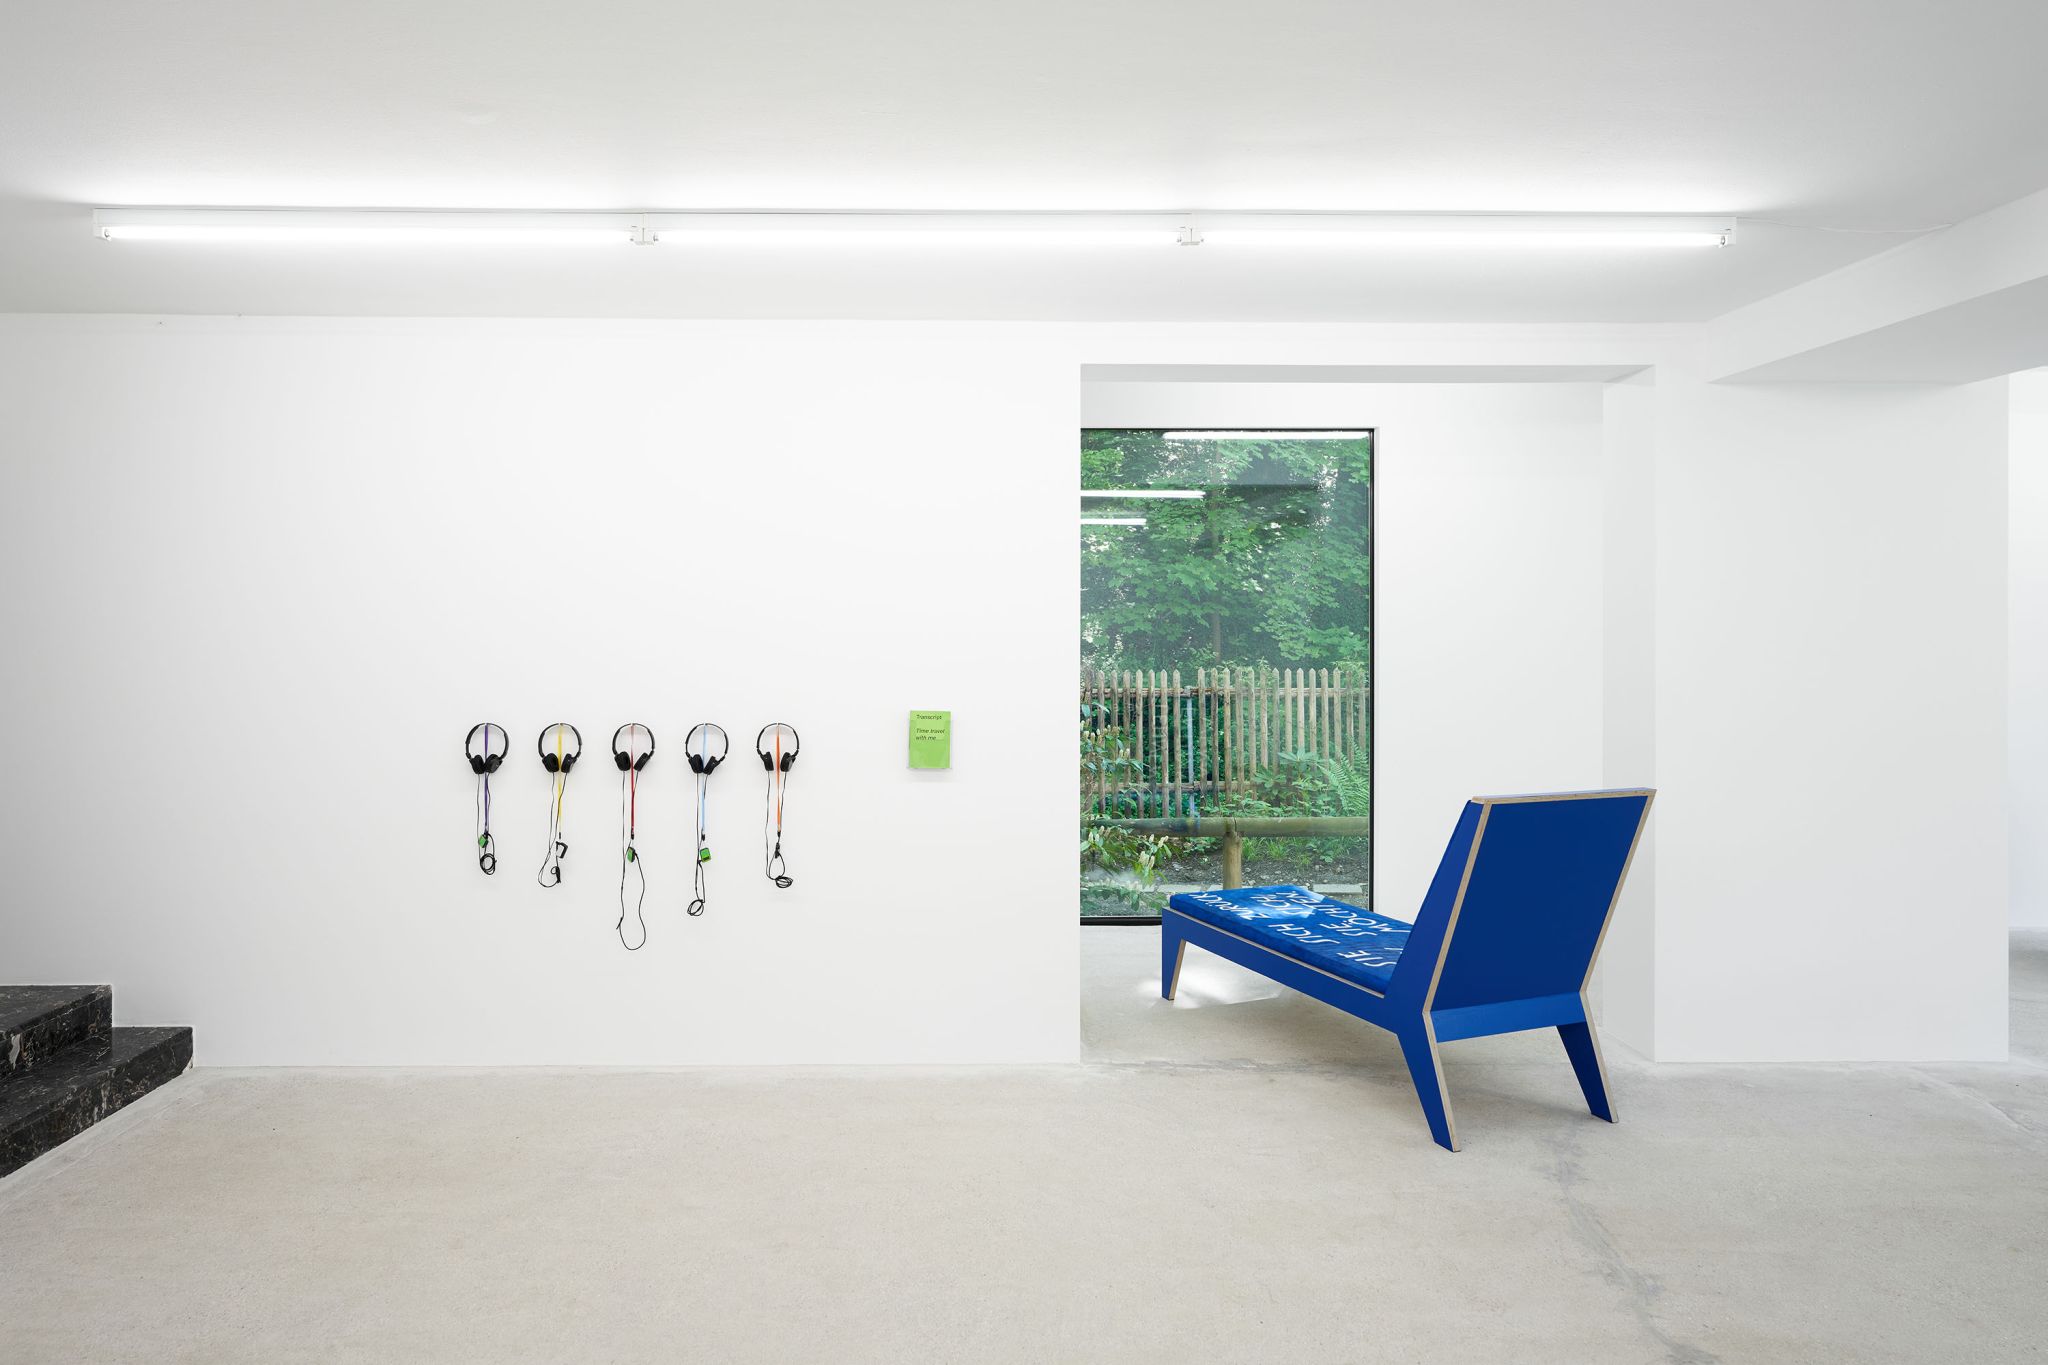 Finnegan Shannon, <em>Slower,</em> Installation view, Deborah Schamoni, 2022, Image description: Five headphones plugged into mp3 players are hanging on a wall next to a blue chaise lounge facing out of the window.